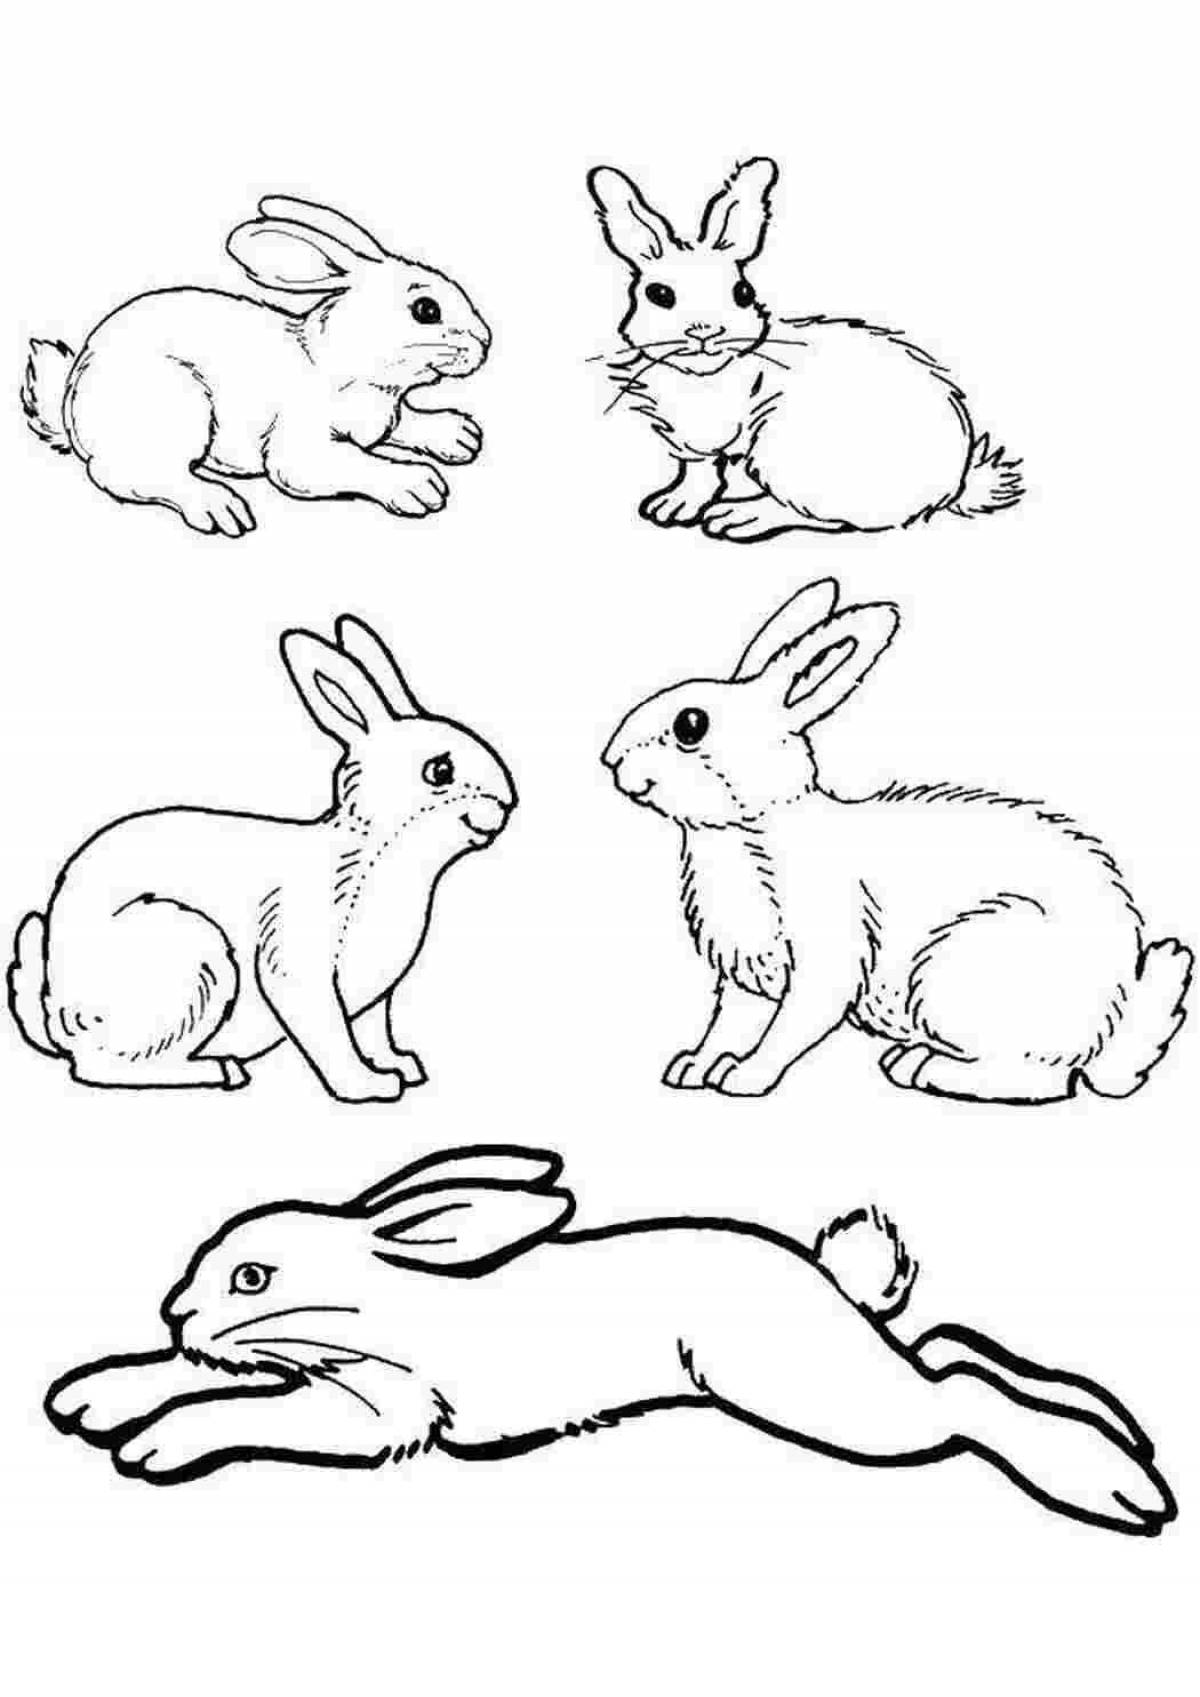 A fascinating hare coloring book for kids